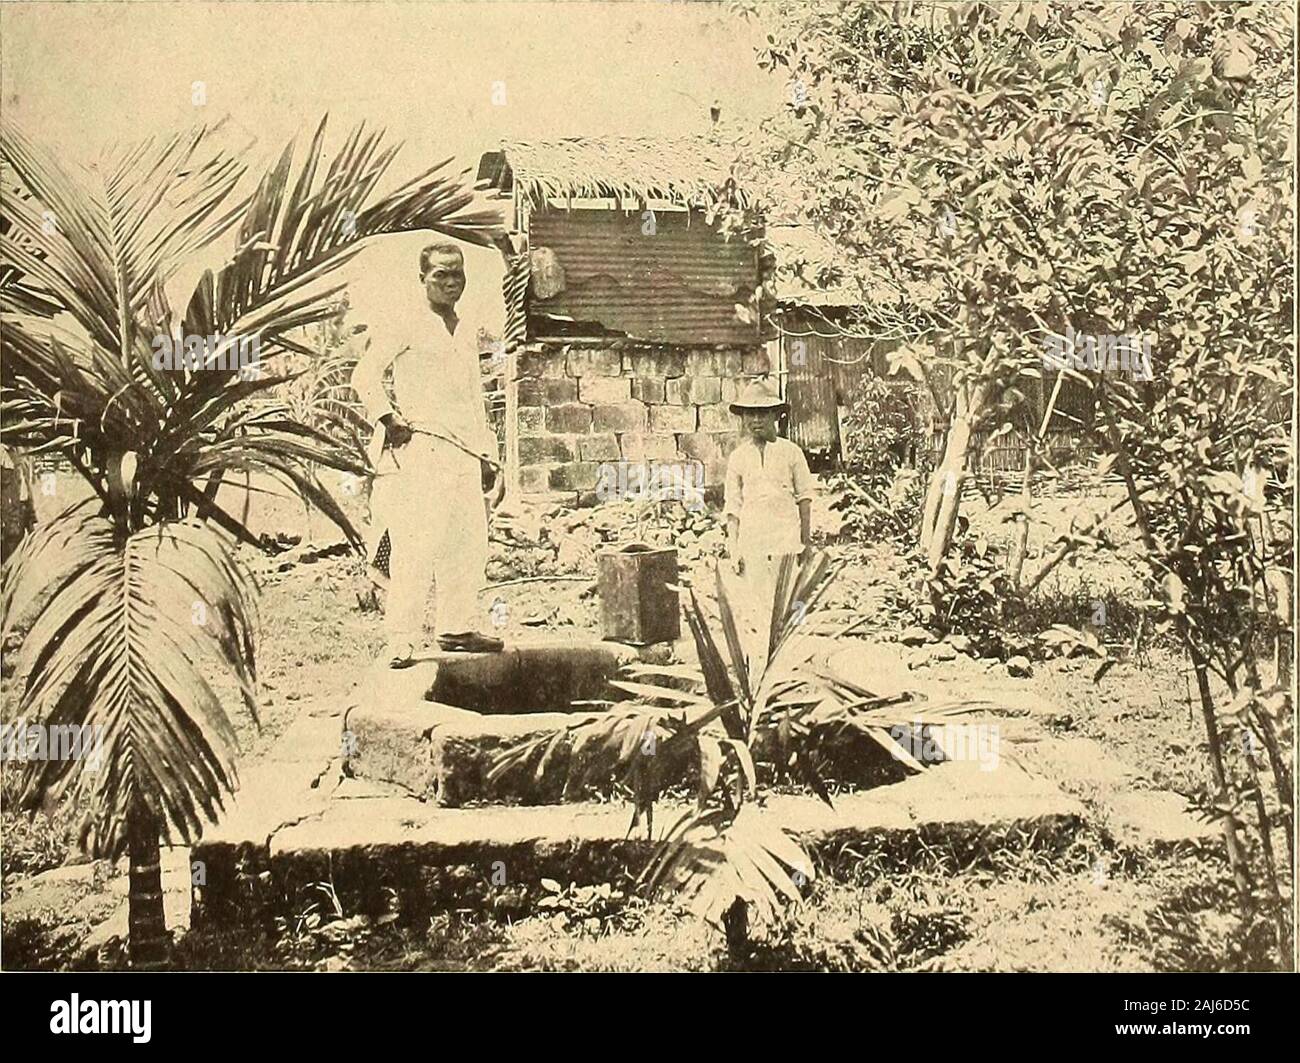 The Philippine journal of science . Fig. 1. Open well near municipal building, Taytay, Rizal Province.. Fig. 2. Outhouse in proximity to well, Taytay, Rizal Province.PLATE 1. Cox ET AL.: Water Supplies of the Philippines.] [Phil. Journ. Sci., IX, A, No. 4. Stock Photo